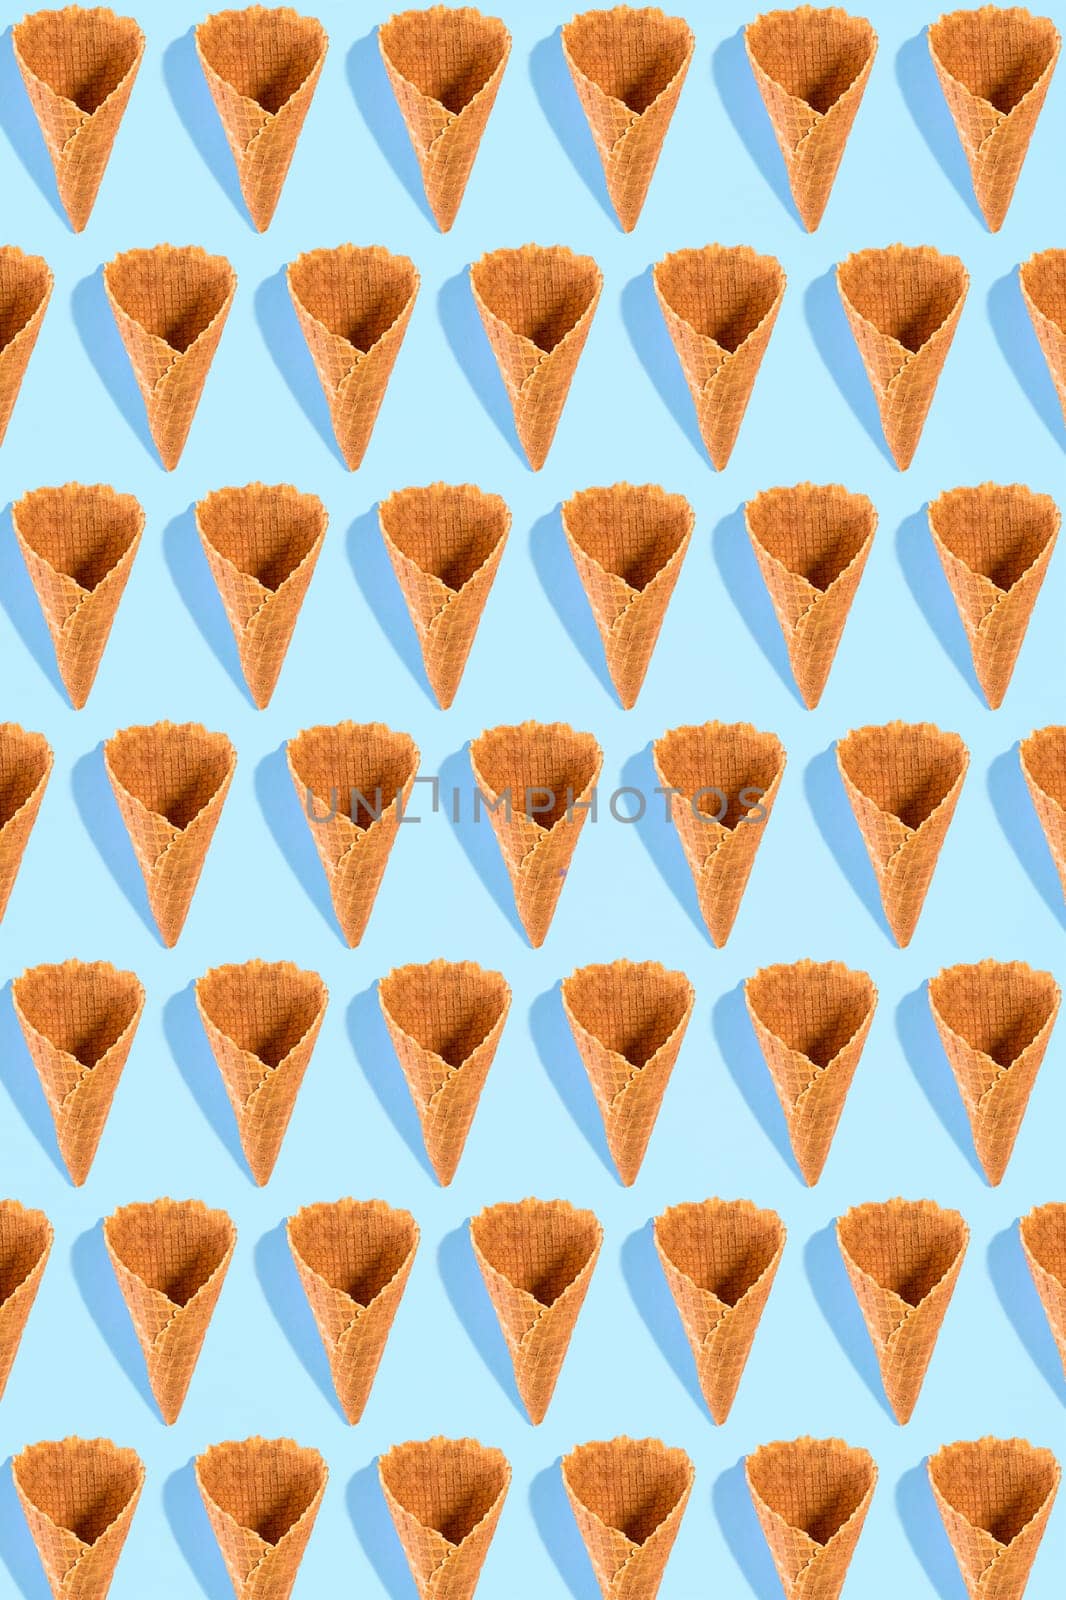 Sugar waffle cone for ice cream arranged in pattern on mint background. The image with copy space can be used as a background for the design of the confectionery menu, cards, greetings, invitations, pattern